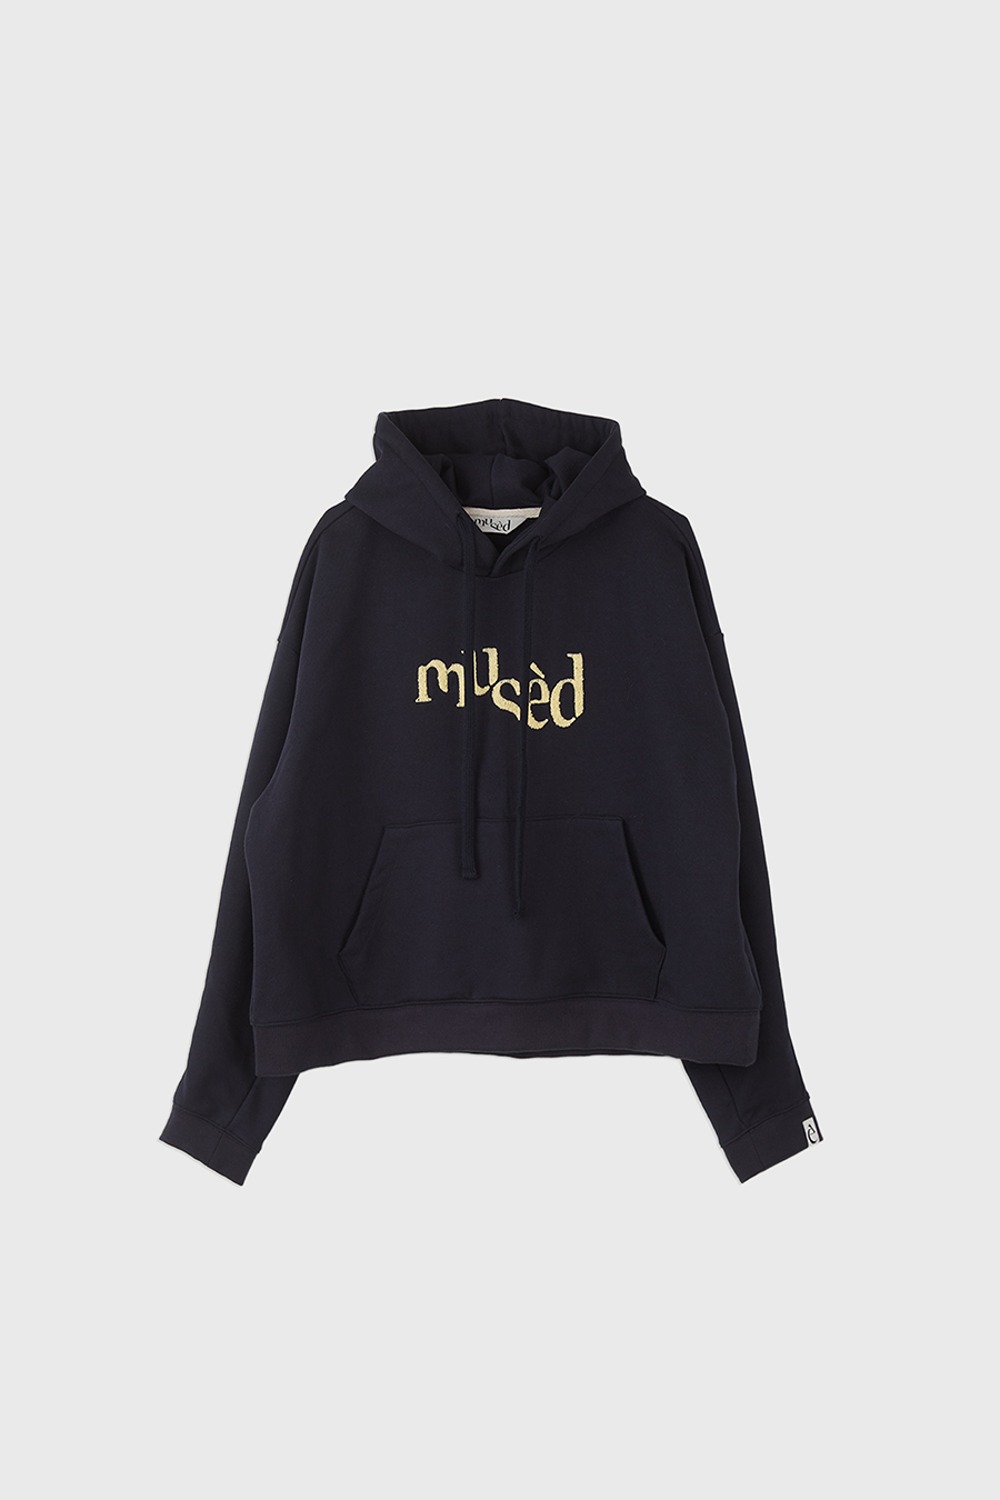 (23FW) MUSED EMBROIDERY LOGO HOODIE NAVY